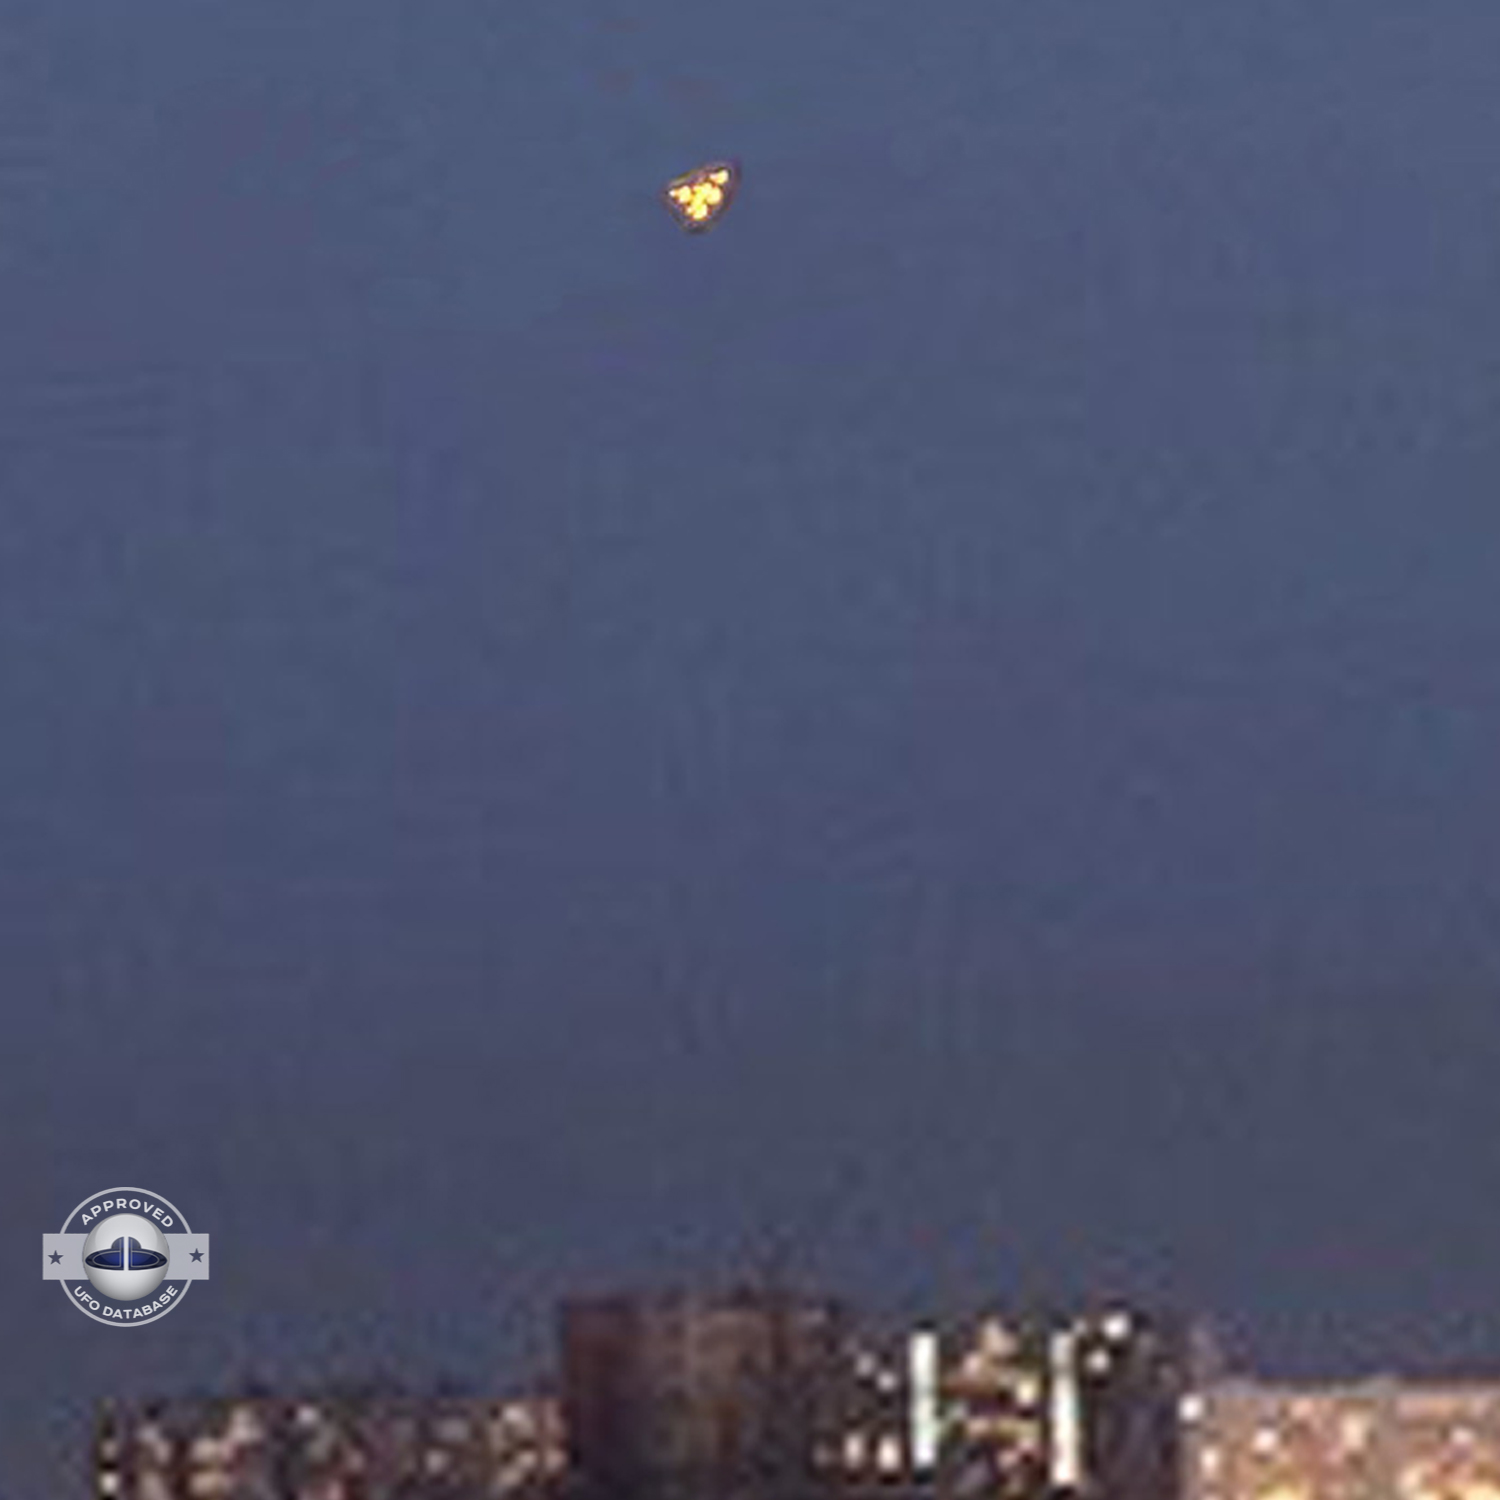 UFO seen by hundreds in Vladivostok | Russia UFO picture | 2010 UFO Picture #167-4